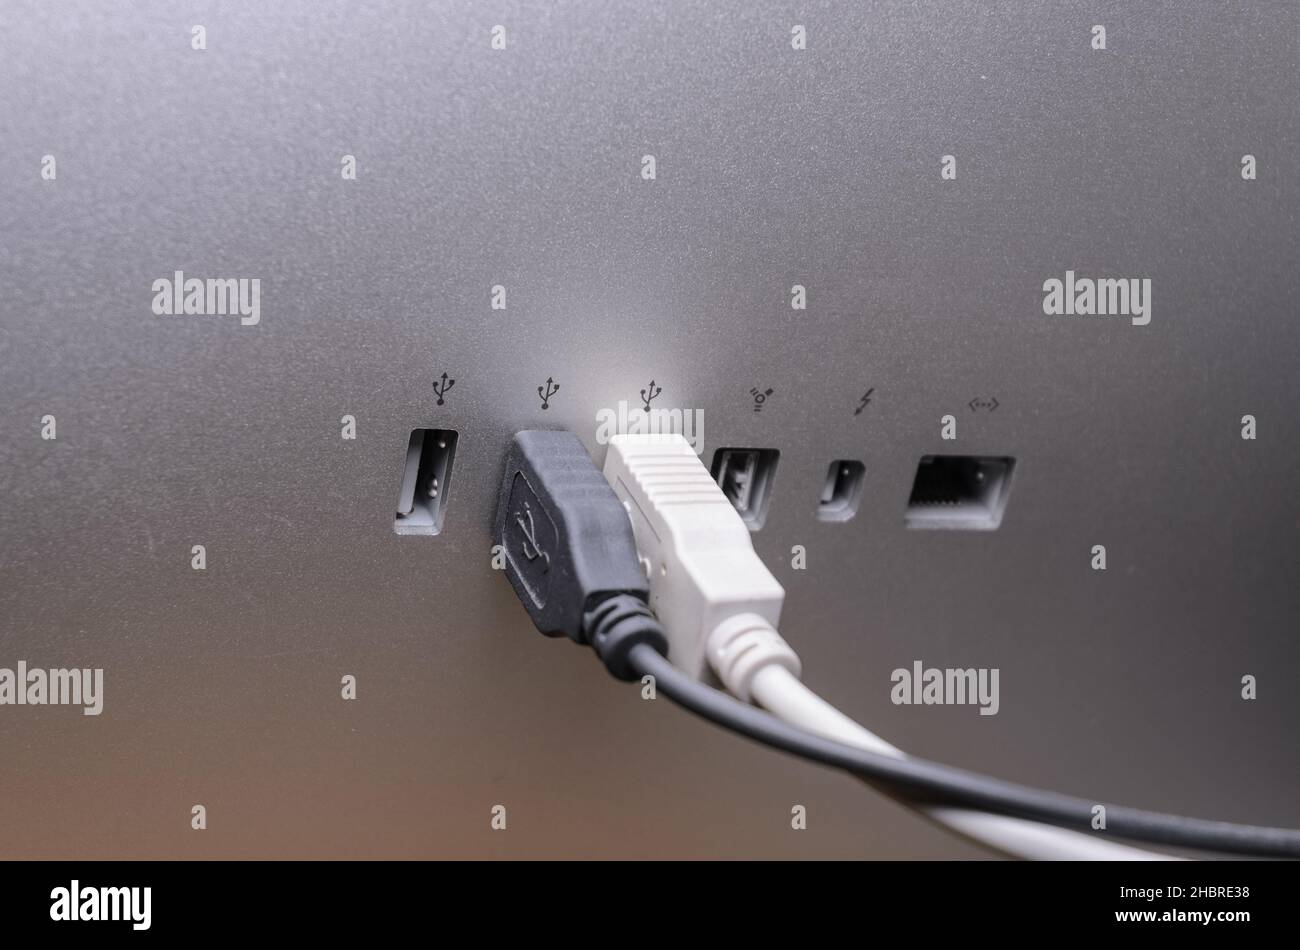 USB cables connected to ports on the back of an Apple Thunderbolt Display Stock Photo